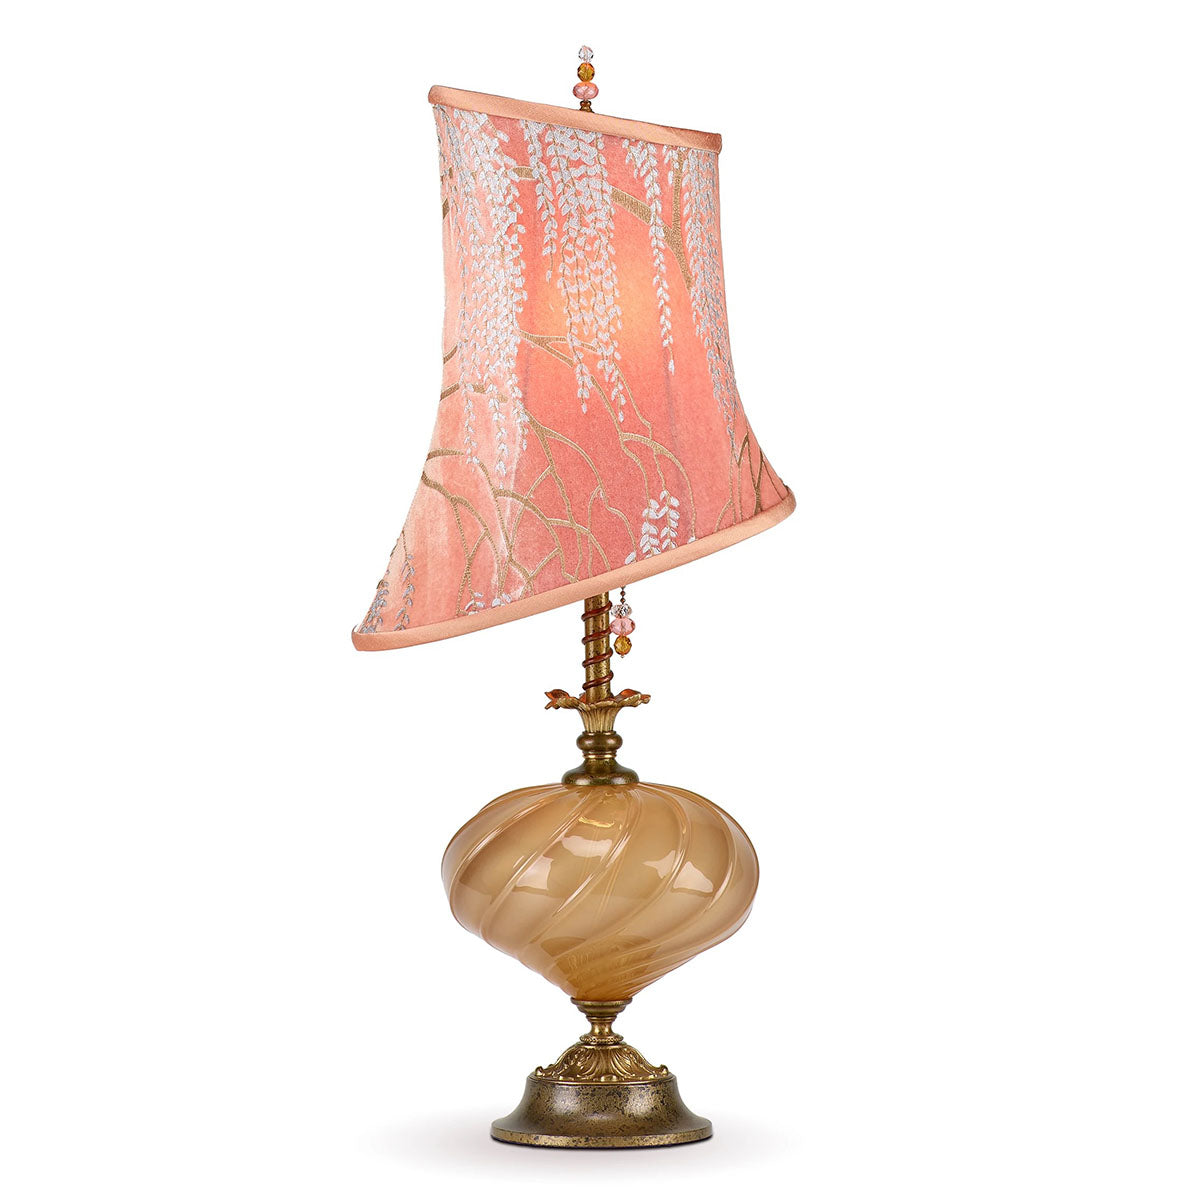 mixed media petite lamp neutral gold blown glass and copper Salmon velvet embossed shade willow leaf pattern